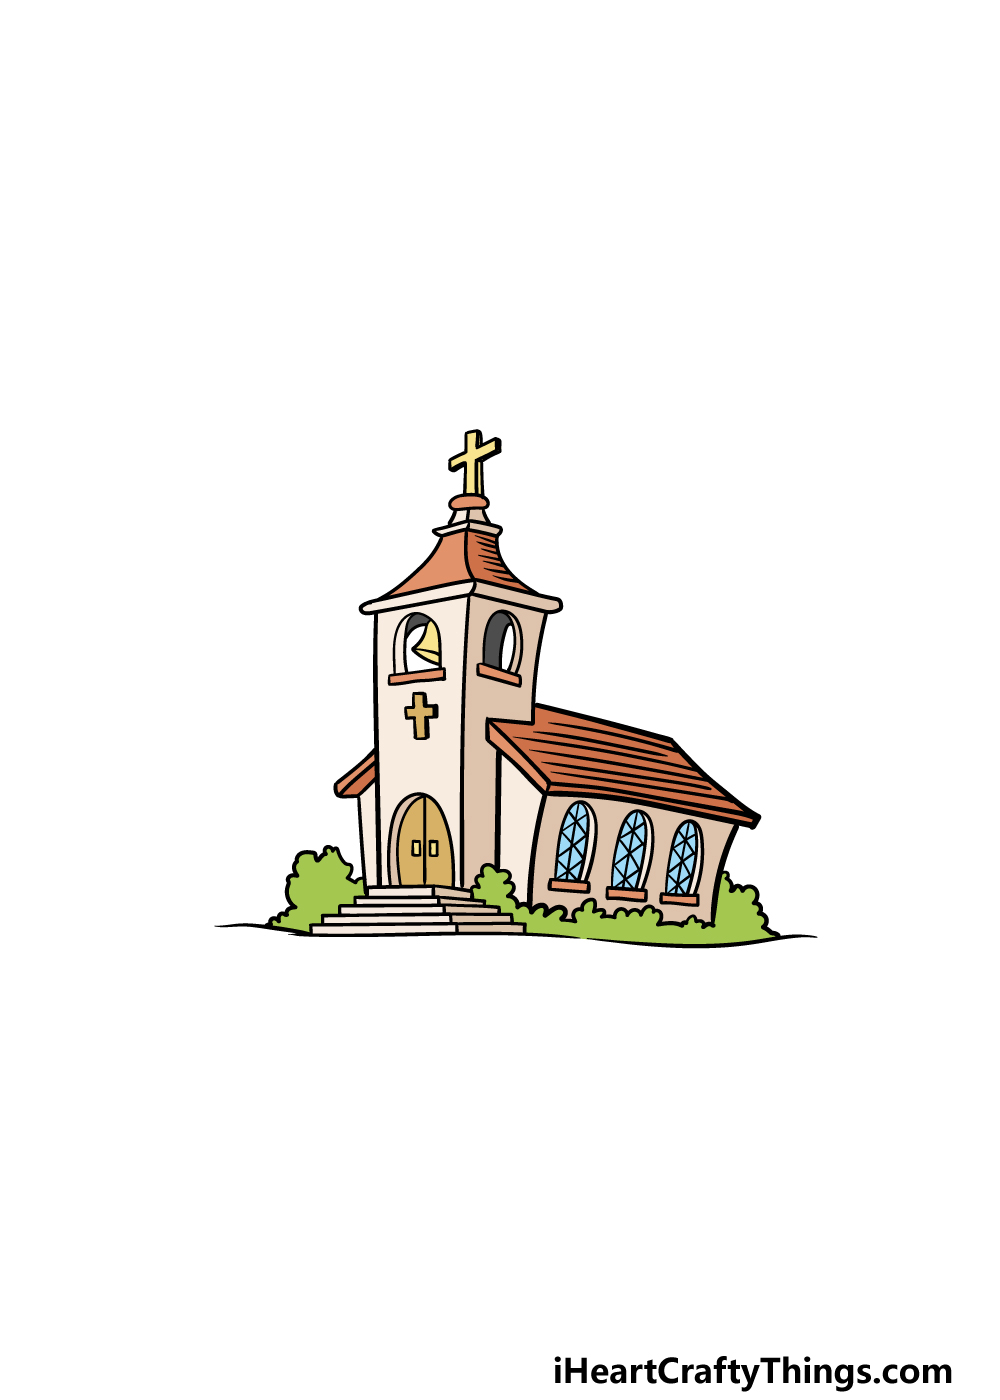 Christianity Line Art Church Architecture House Building Religious Design  Vector Illustration Royalty Free SVG, Cliparts, Vectors, And Stock  Illustration. Image 143796378.